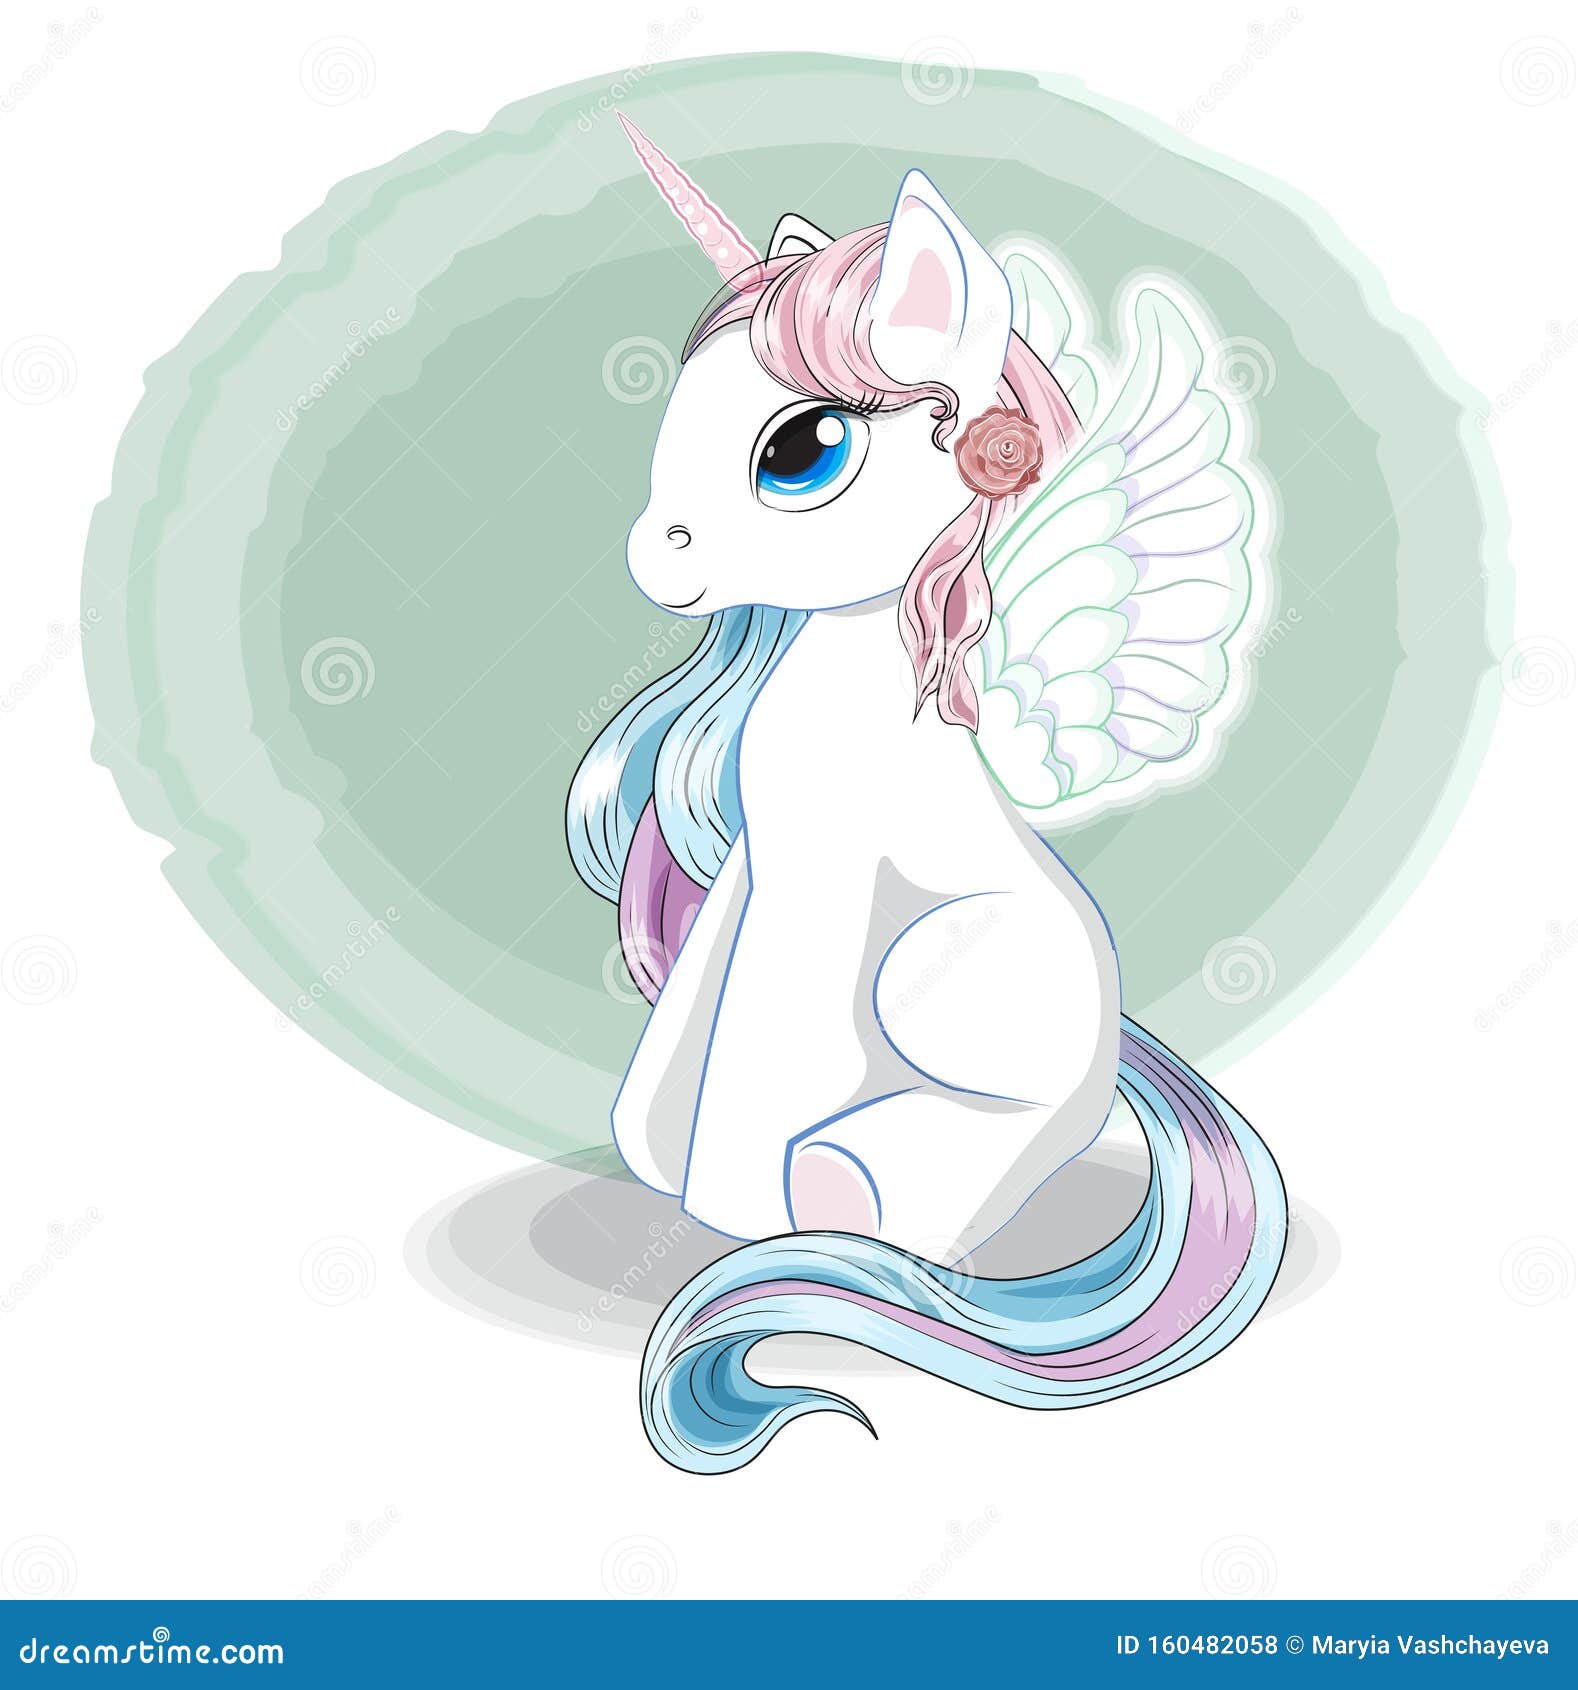 How To Draw A Unicorn With Wings : How To Draw Cute Chibi Cartoon